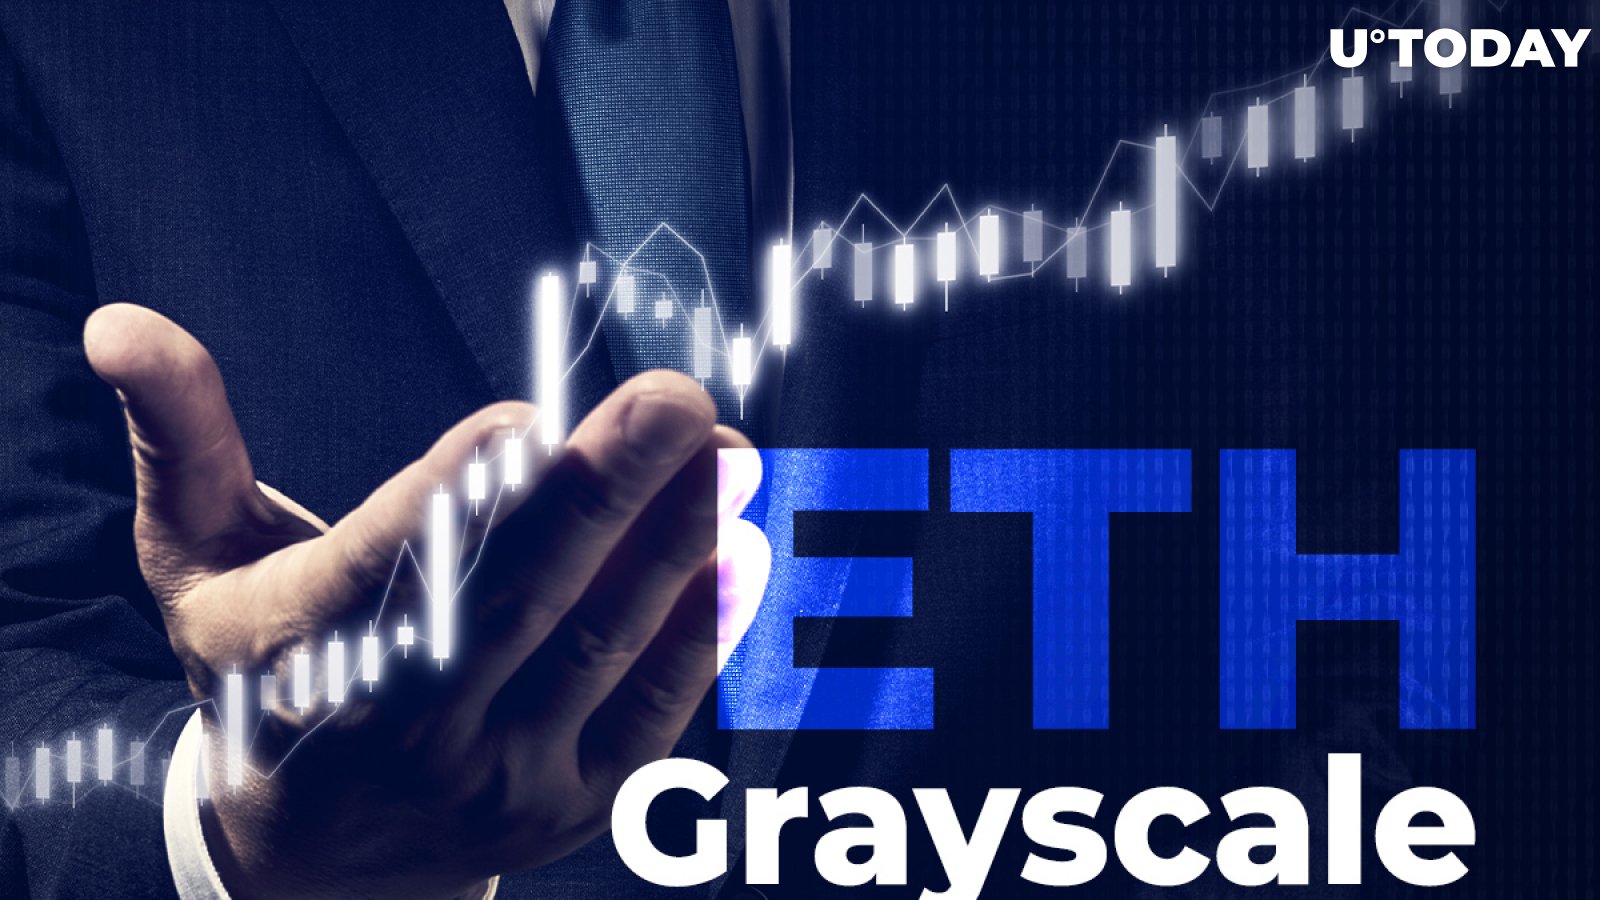 Grayscale's ETHE Share Split Takes Place Today, Shareholders to Get More ETH